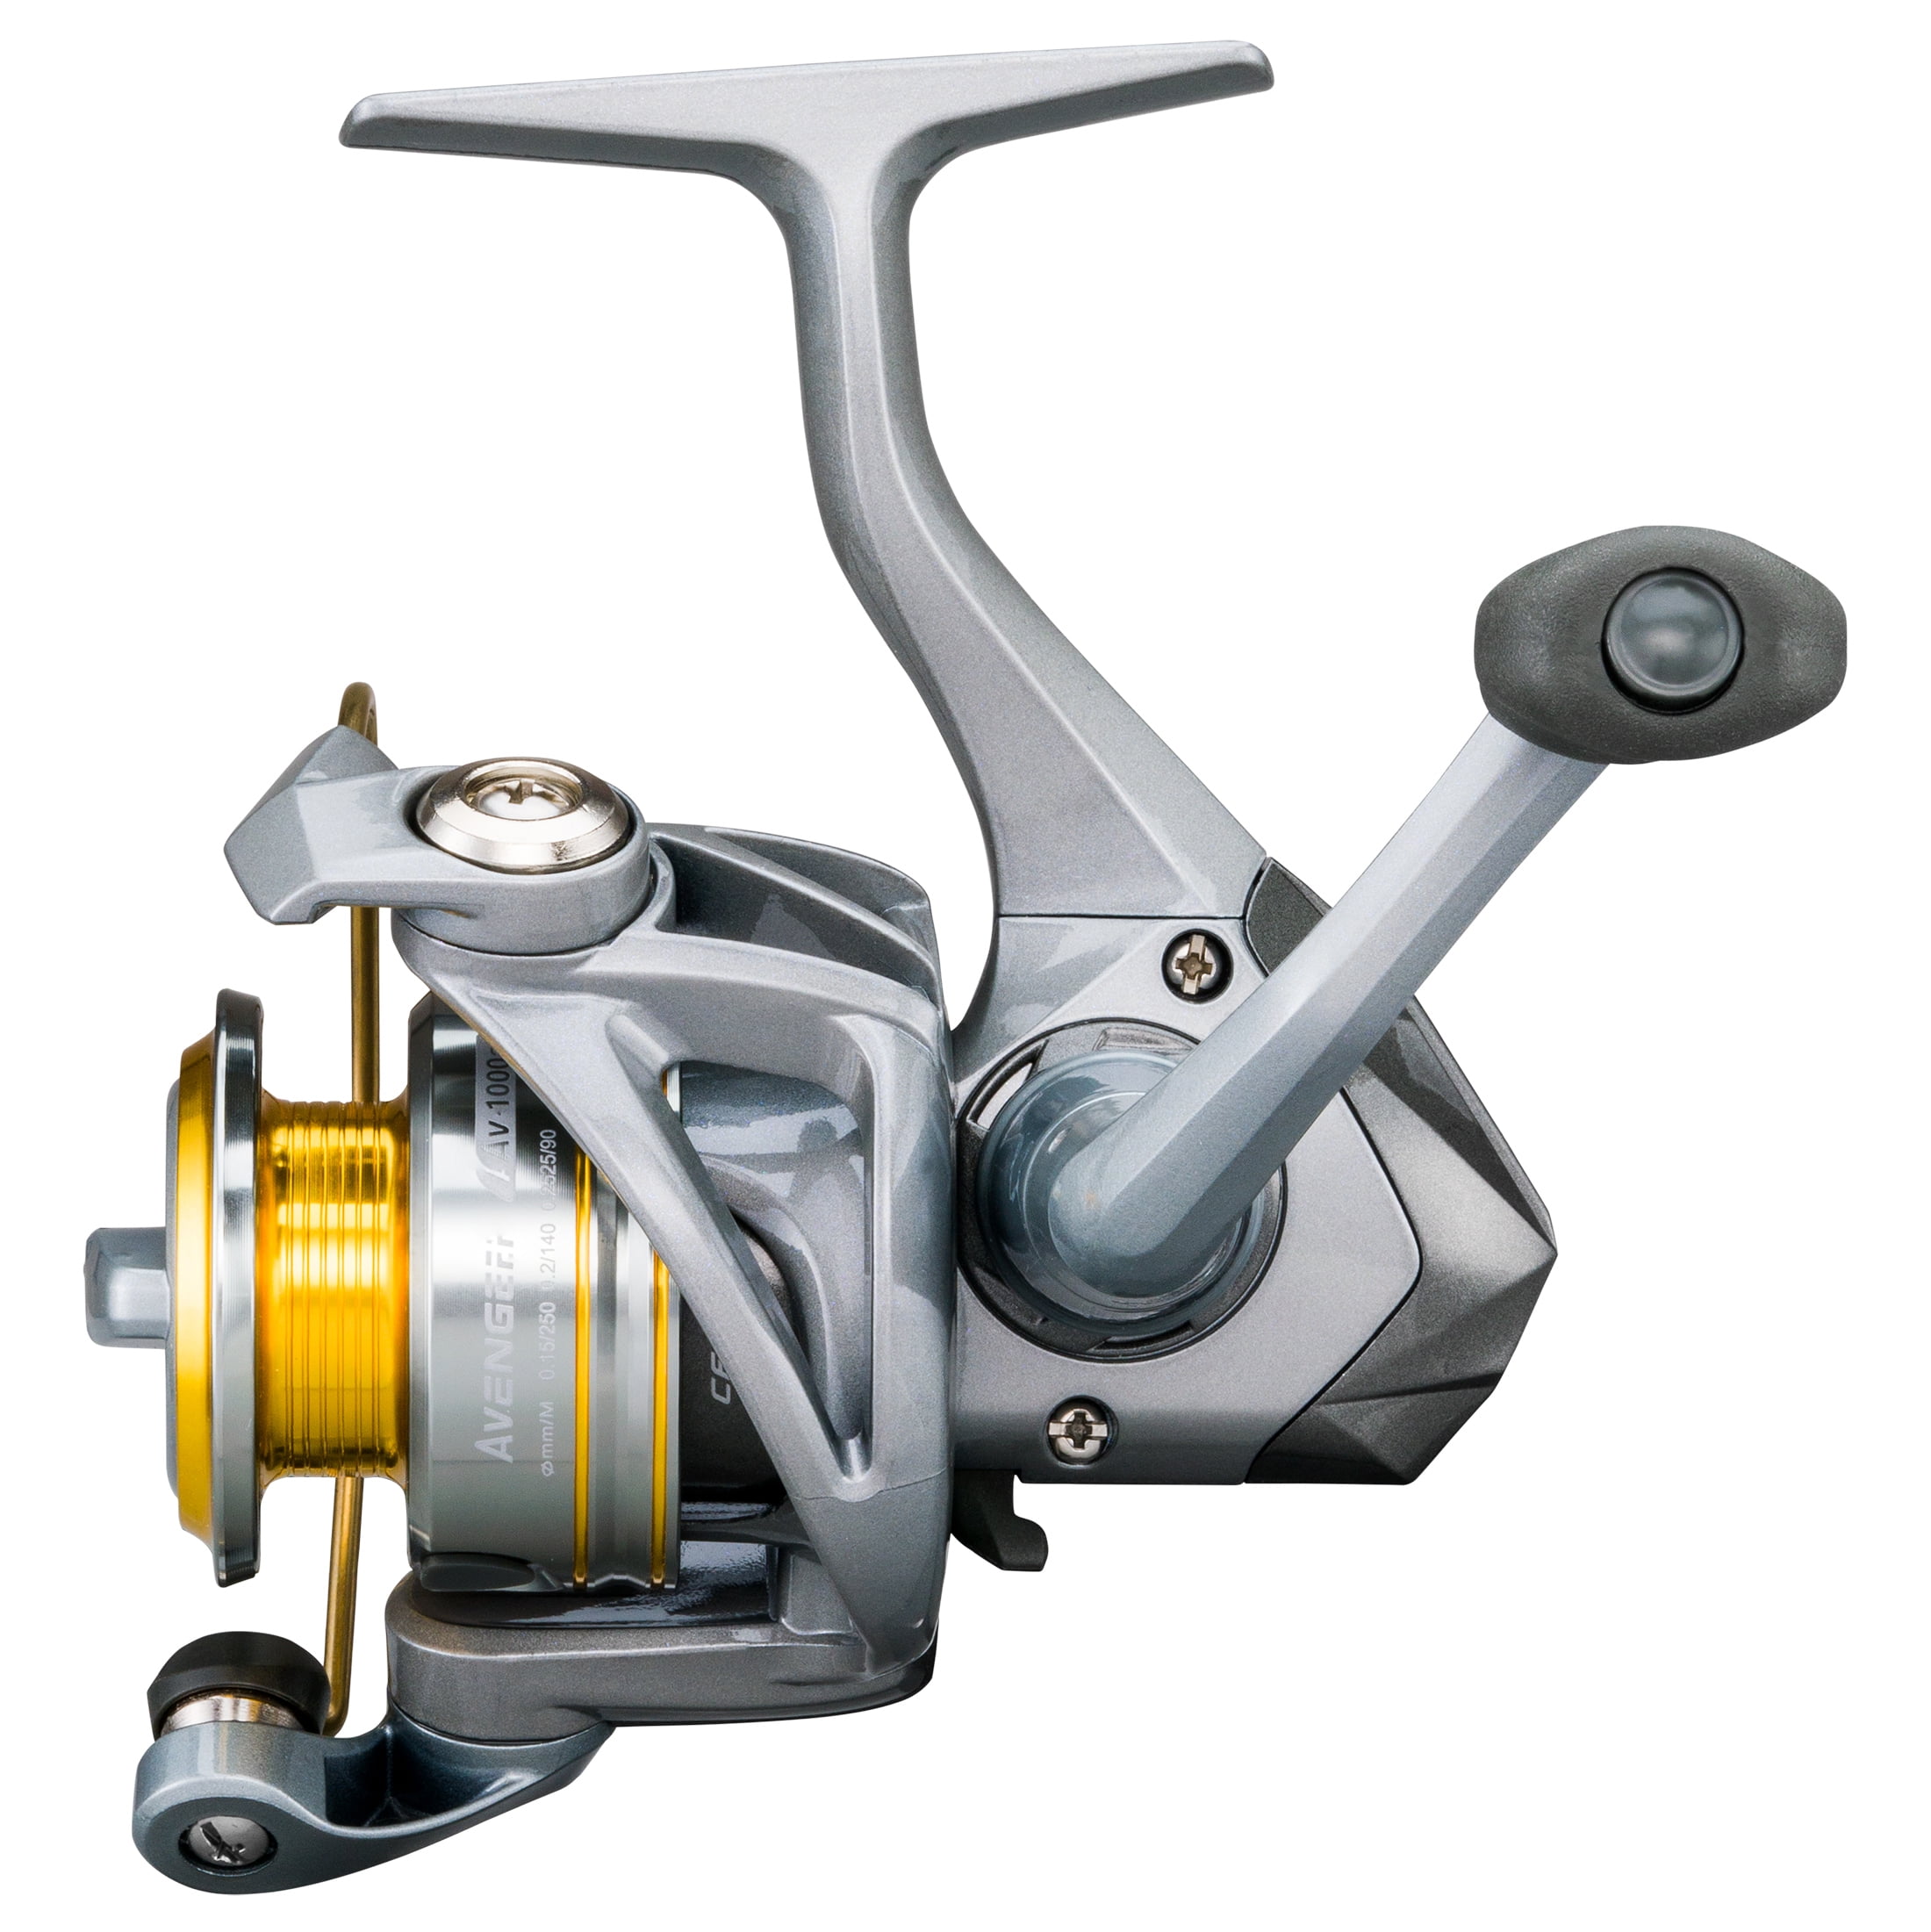 Okuma Baoxiong Round Casting Reels 10KG Brake Force Gapless Spinning Wheel  Sea Pole Remote Casting For Fishing Boats 1000 1300 From Ren06, $23.1